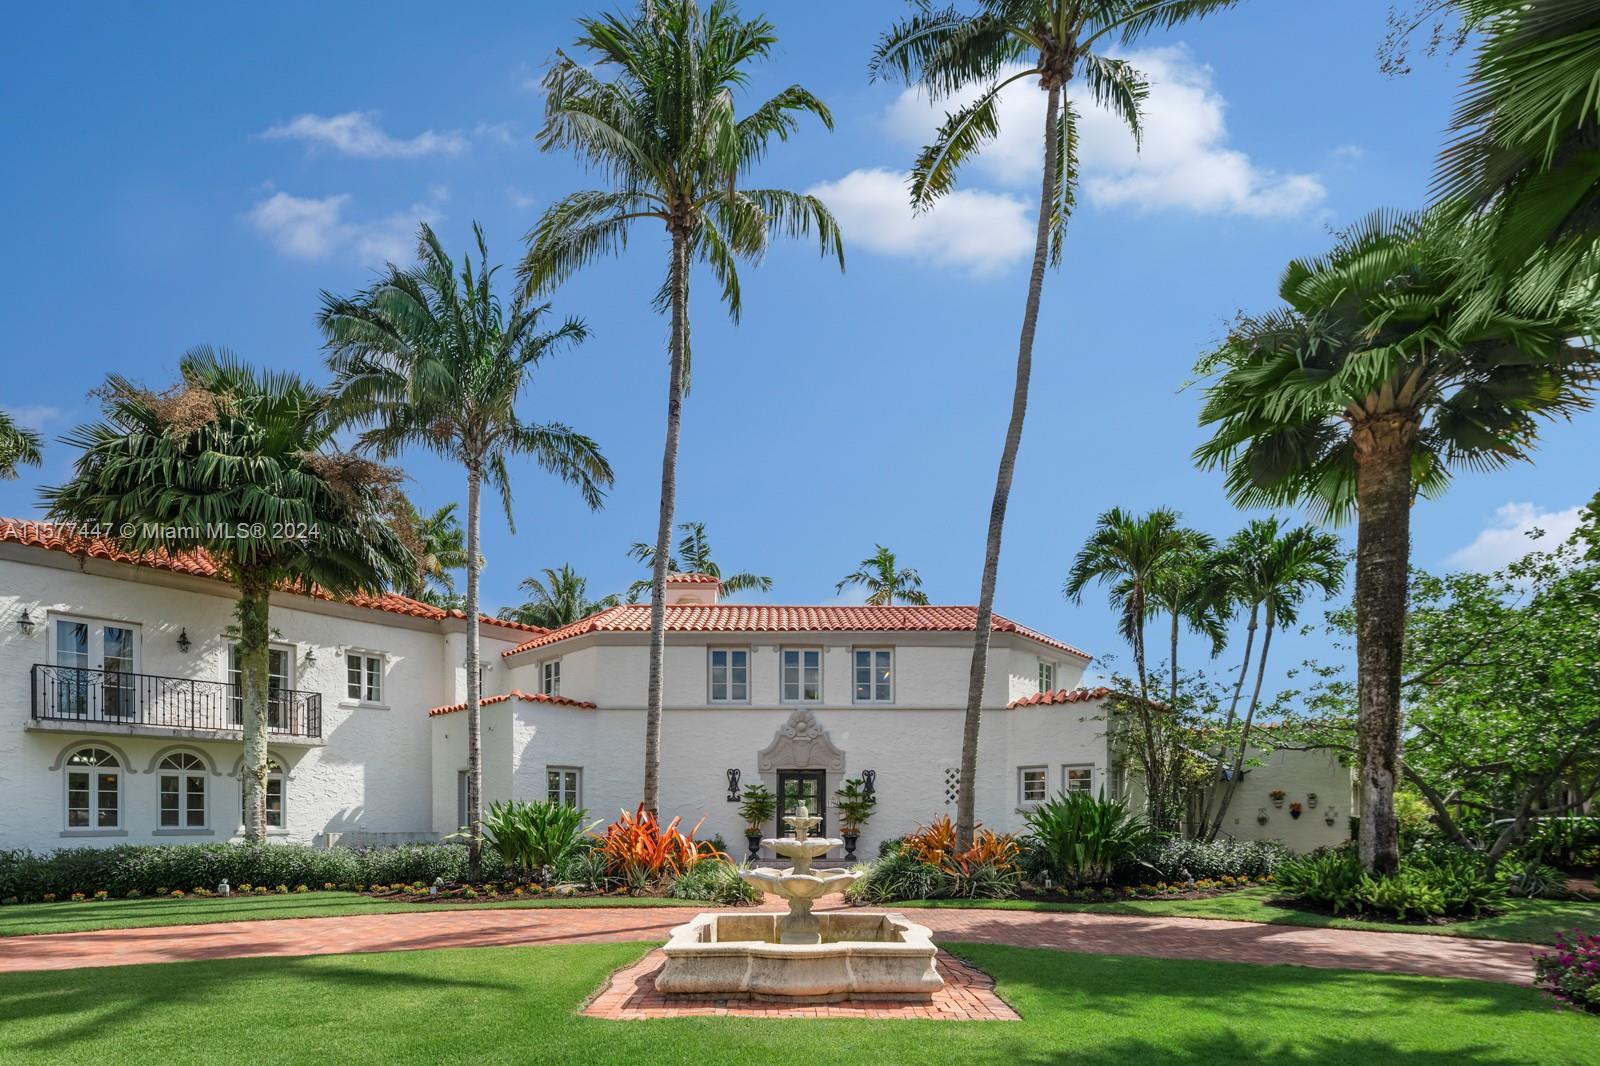 This elegant two-story 1924 Old Spanish is the epitome of quintessential living on one of Coral Gables' most prestigious street addresses. This architectural gem designed by Kiehnel & Elliot exemplifies the pinnacle of Mediterranean Revival Artistry. Situated on a 20,645 SF lot right in front of the iconic Biltmore Hotel, the tropical lush landscaping offers immense privacy & a serene atmosphere. The grand foyer overlooks the award-winning pool. 1st floor features 2 bedrooms, 2 full baths, renovated eat-in kitchen with Quartzite countertops, formal dining, living room & media room. 2nd floor features 5 bedrooms + den, 4 bathrooms & large primary suite and bath with built-in sauna, & covered balcony. Home has newer electrical, plumbing, impact windows/doors throughout.